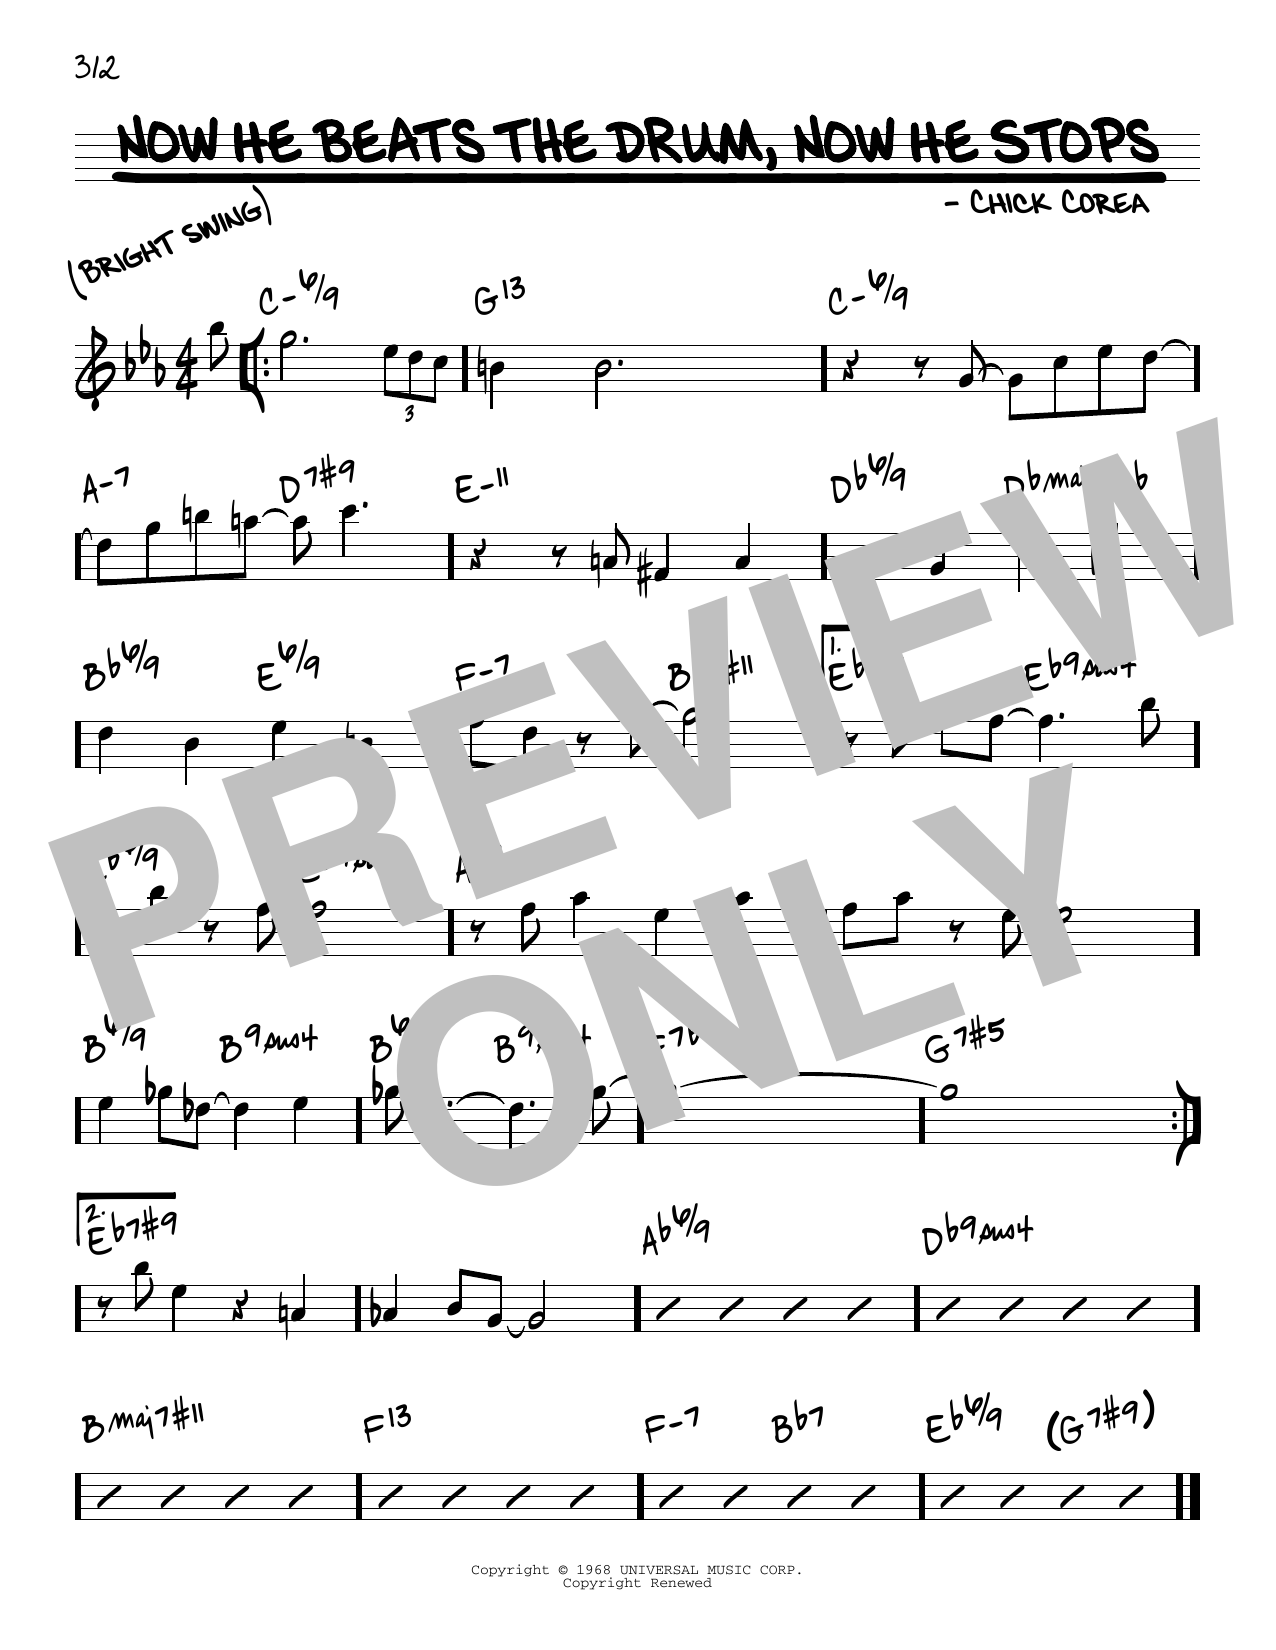 Download Chick Corea Now He Beats The Drum, Now He Stops sheet music and printable PDF score & Jazz music notes